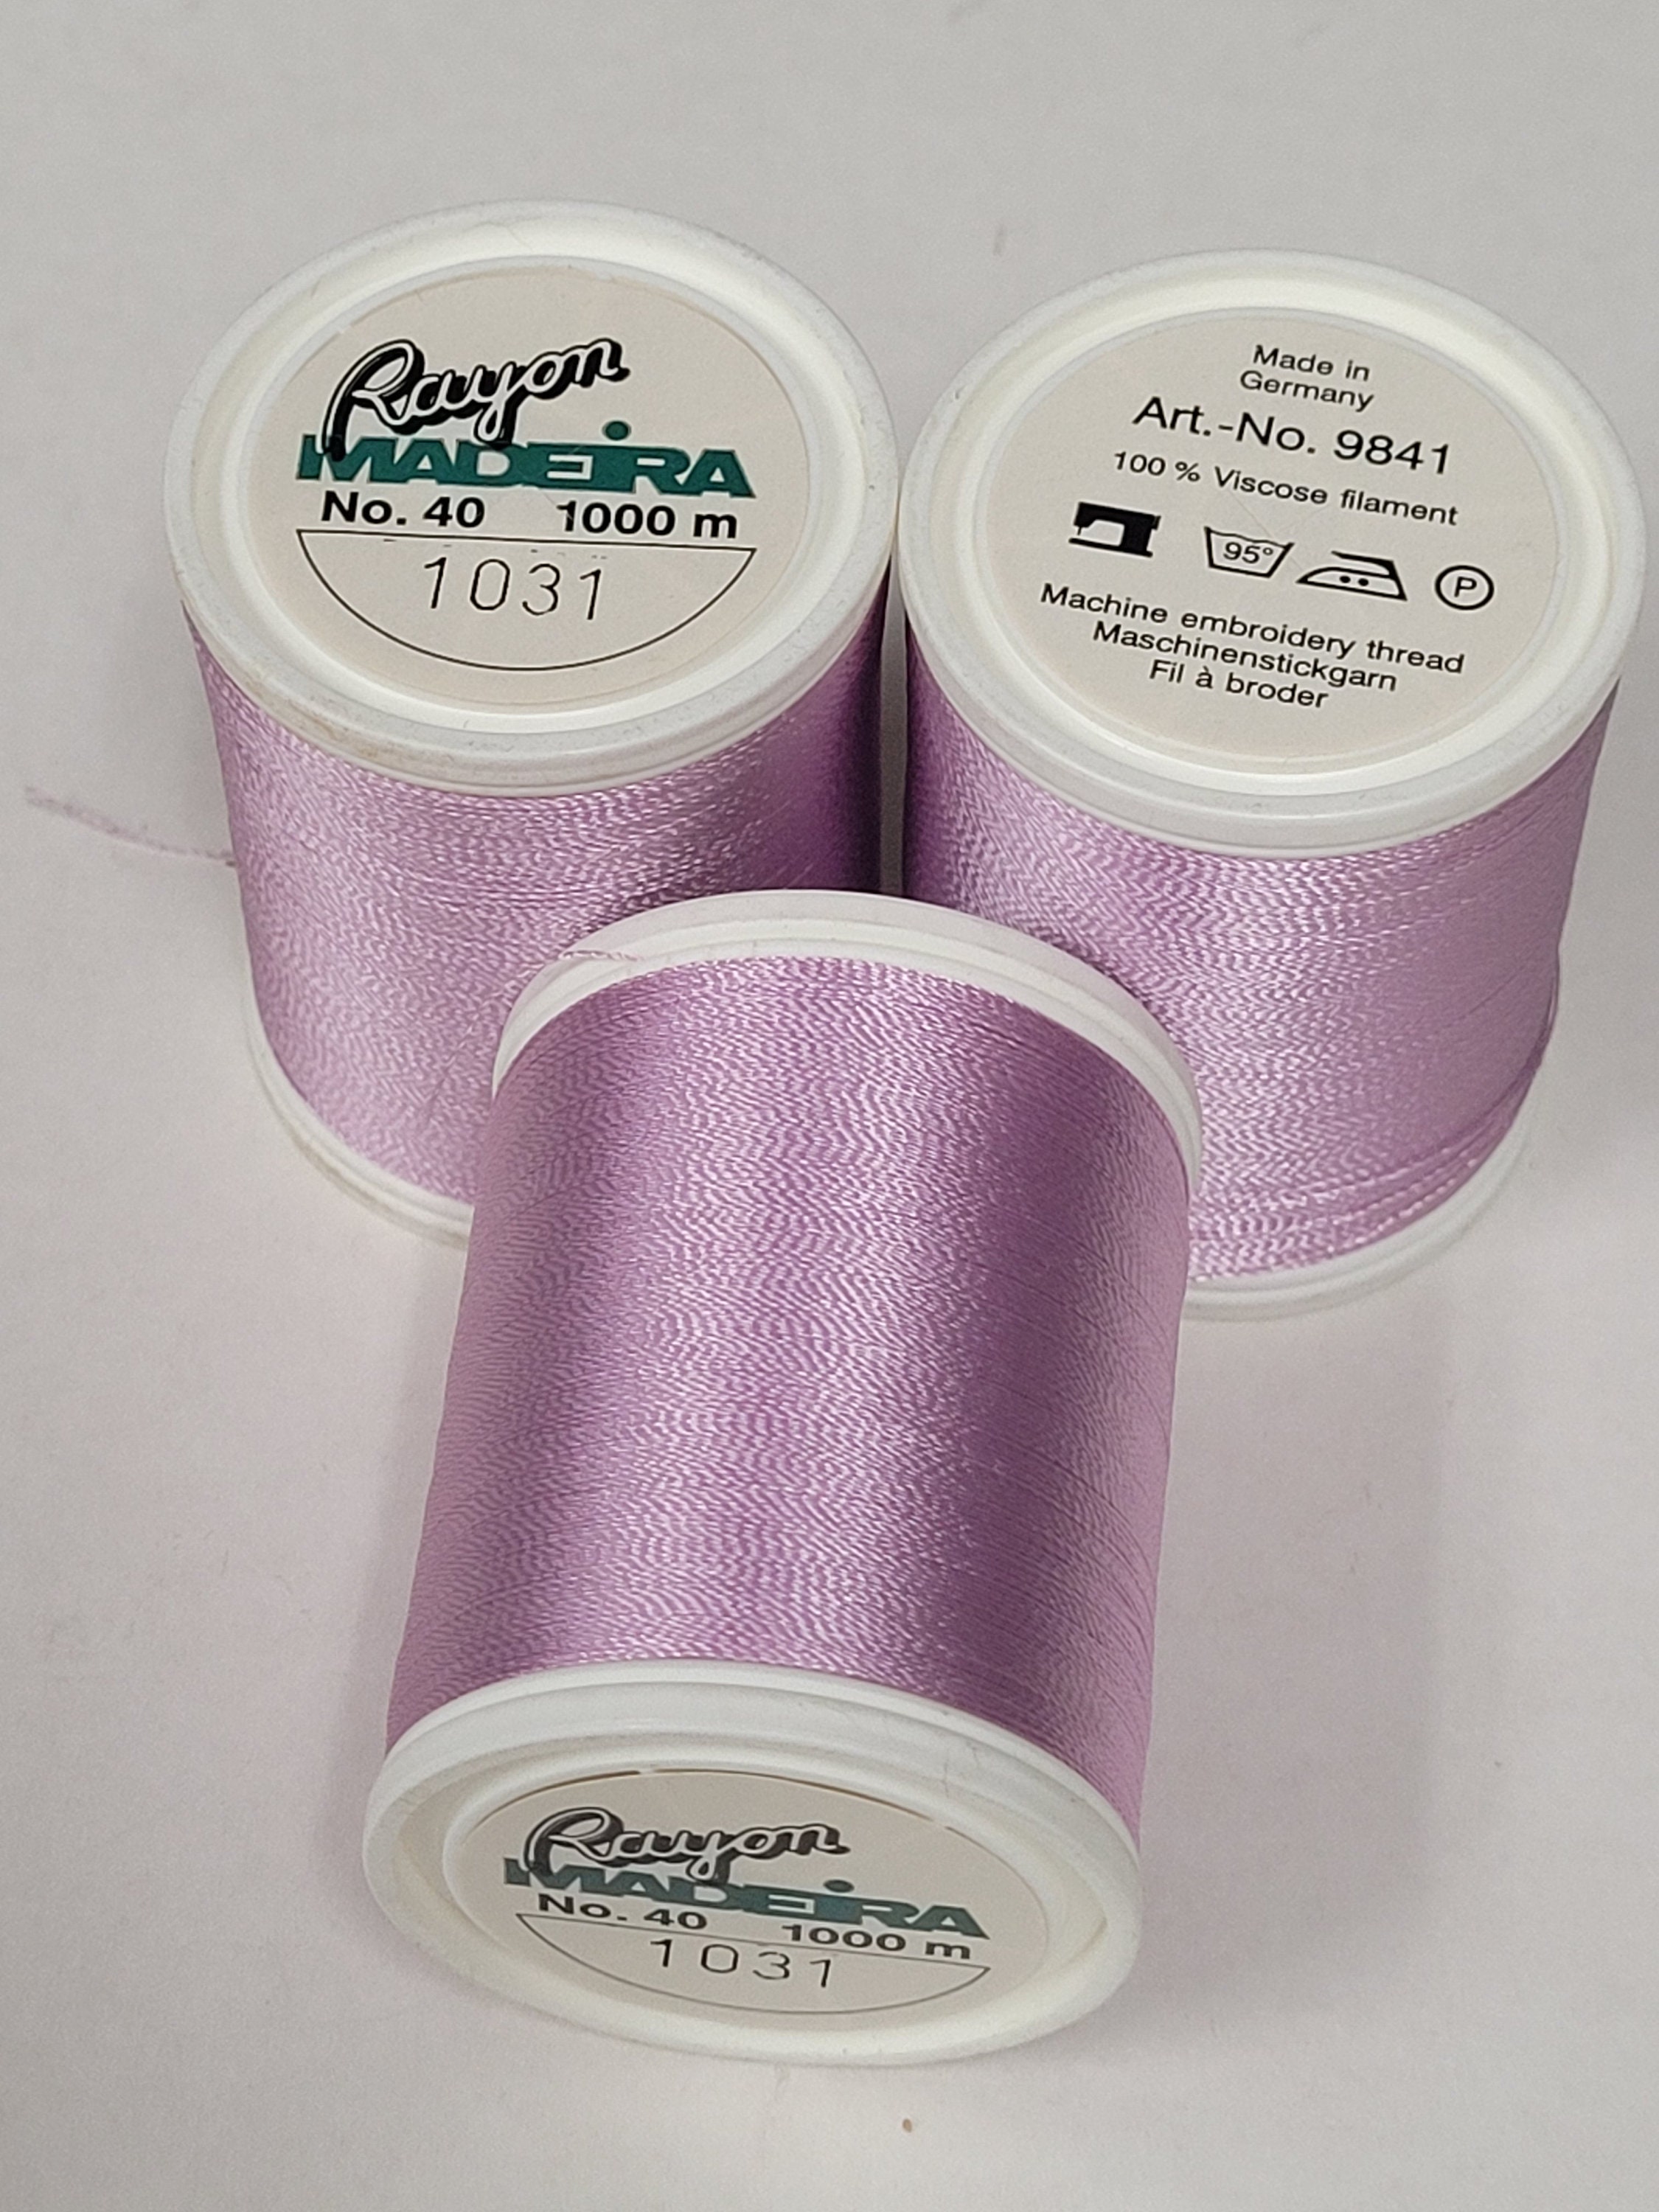 Madeira Rayon 1109 Pink Rose Embroidery Thread 5500 Yards